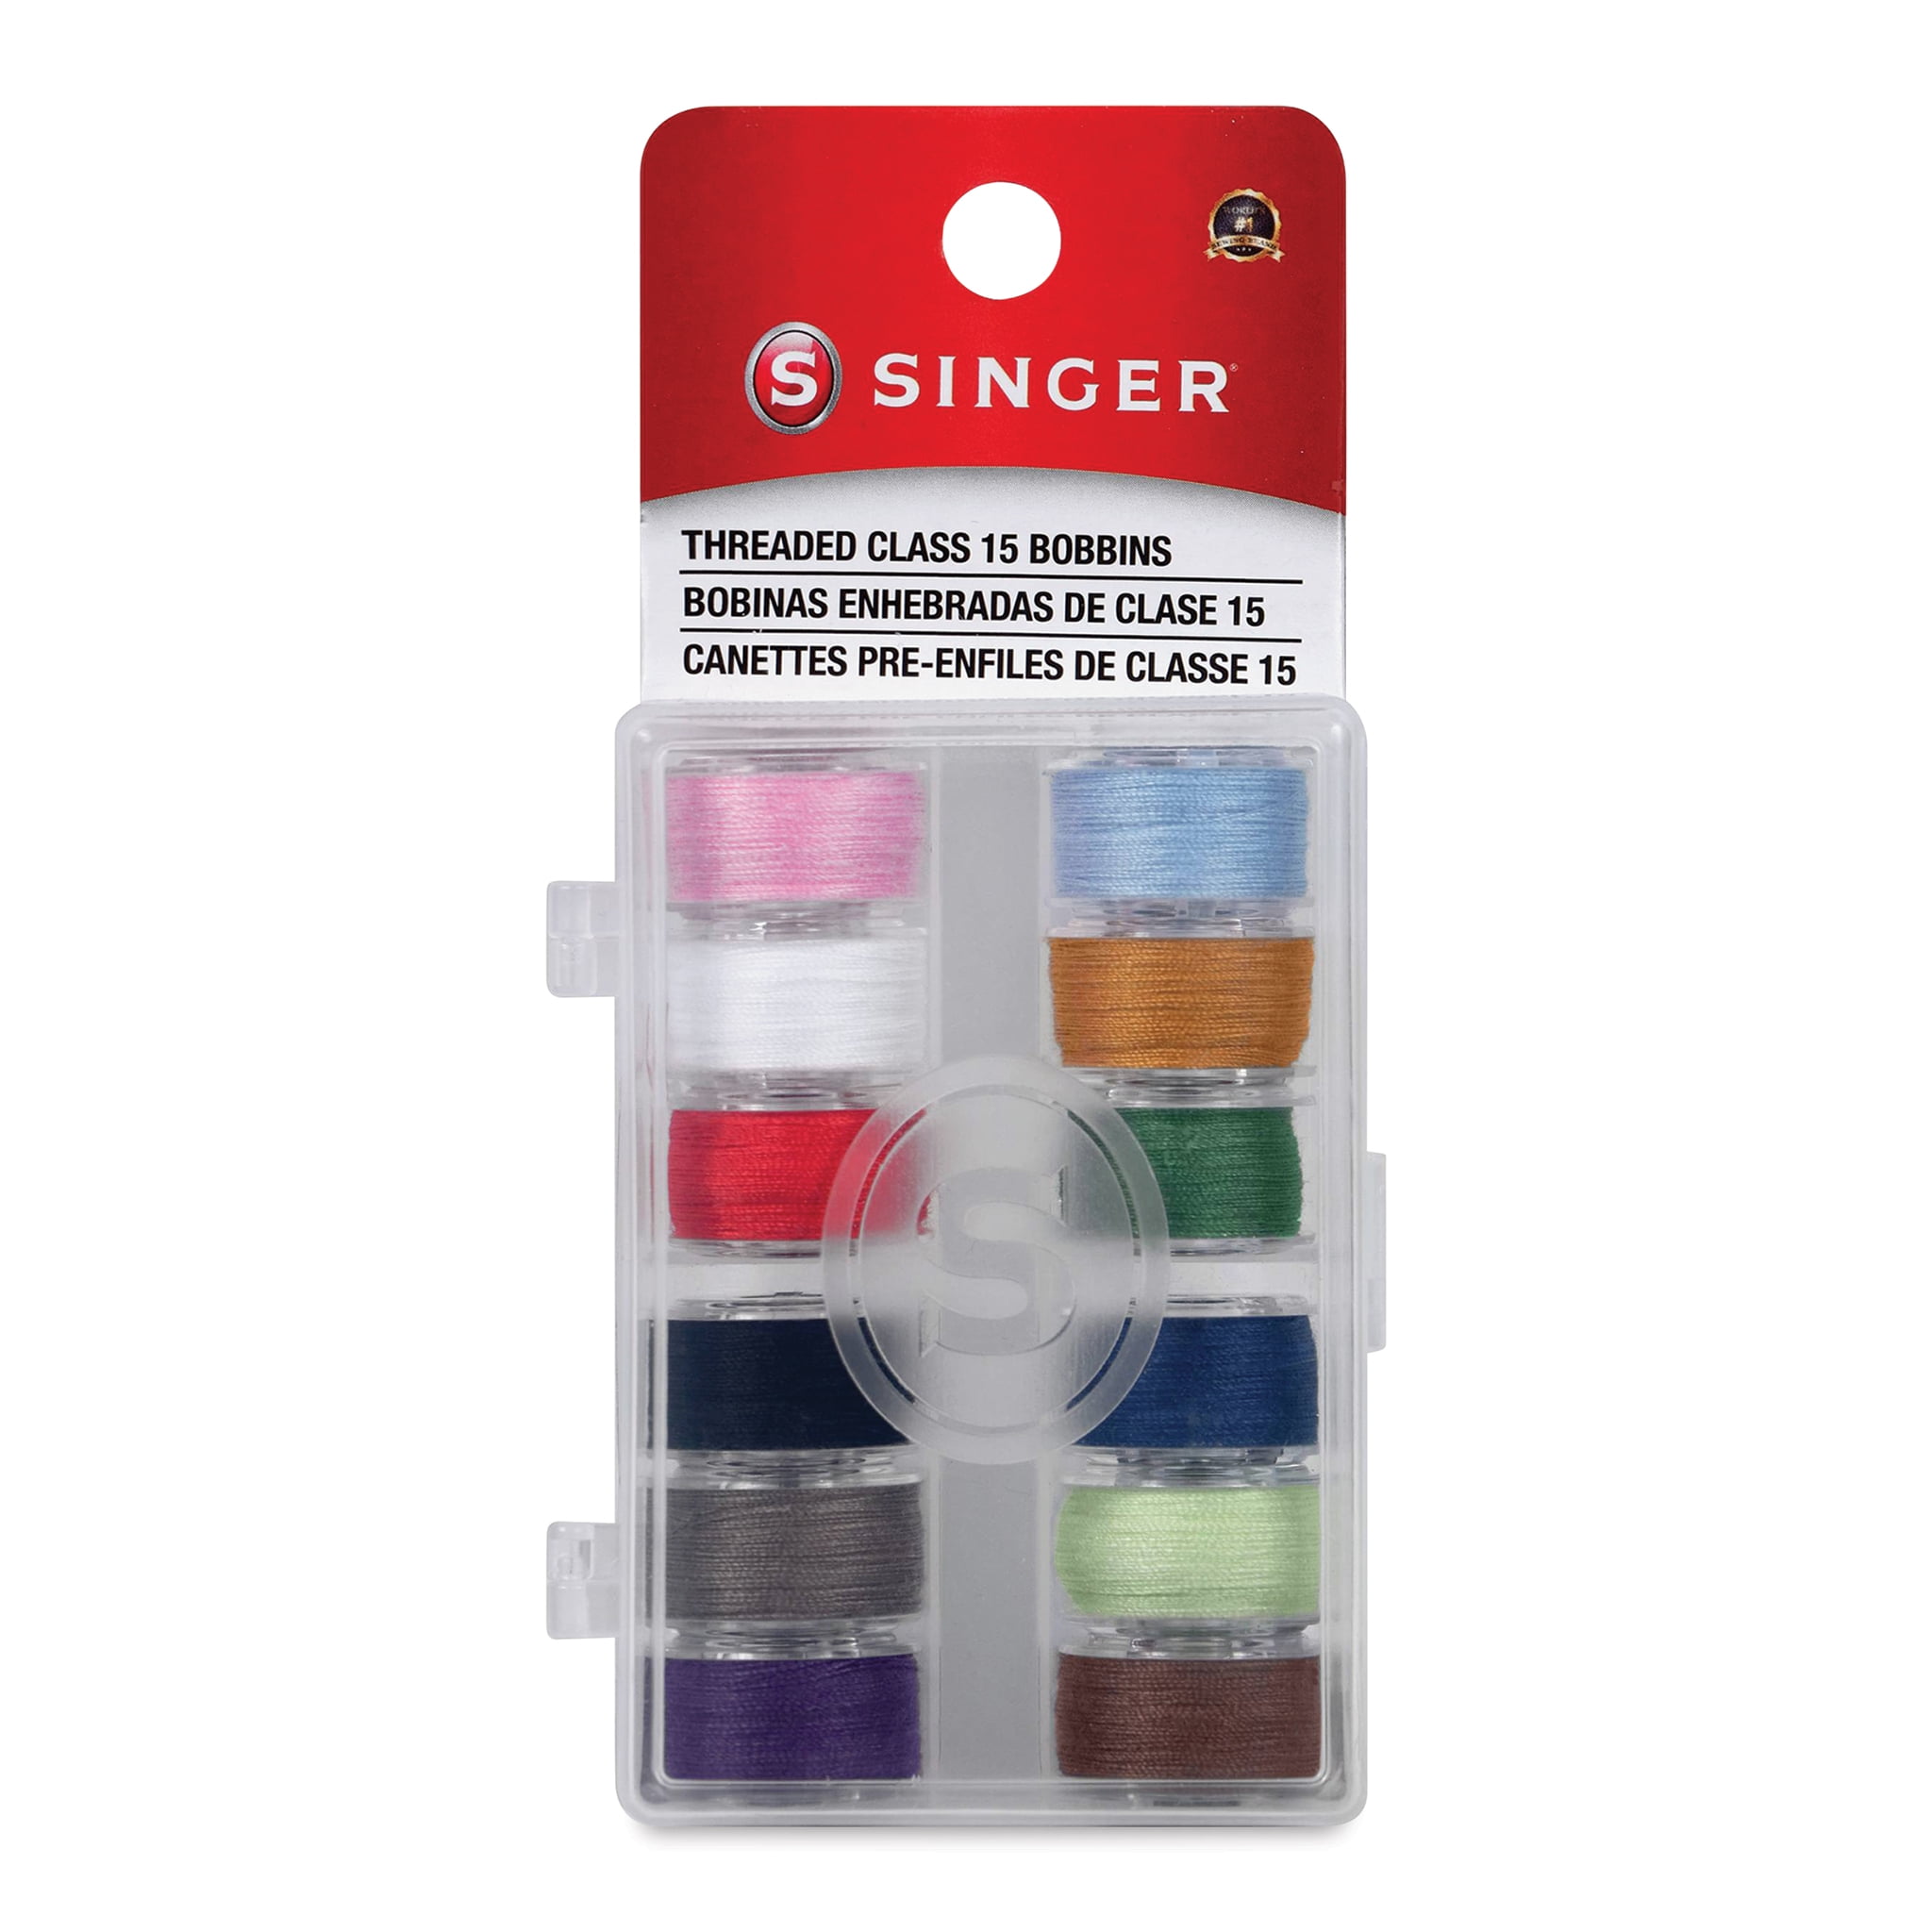 10 Pk. Class 15 (A Size) Plastic Bobbins For Many Home Sewing